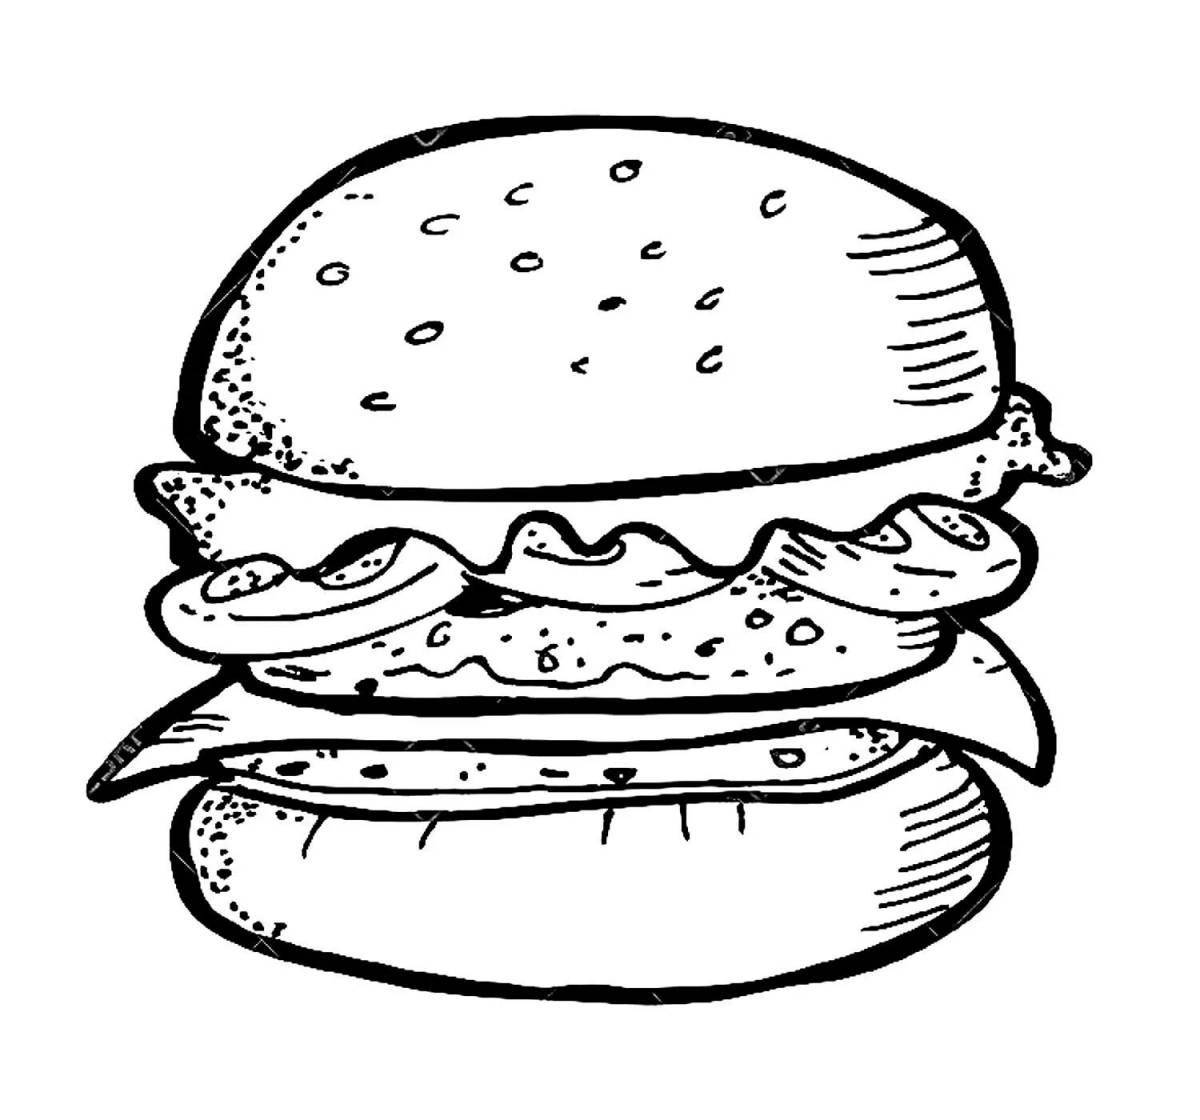 Outstanding boxy boo burger coloring page